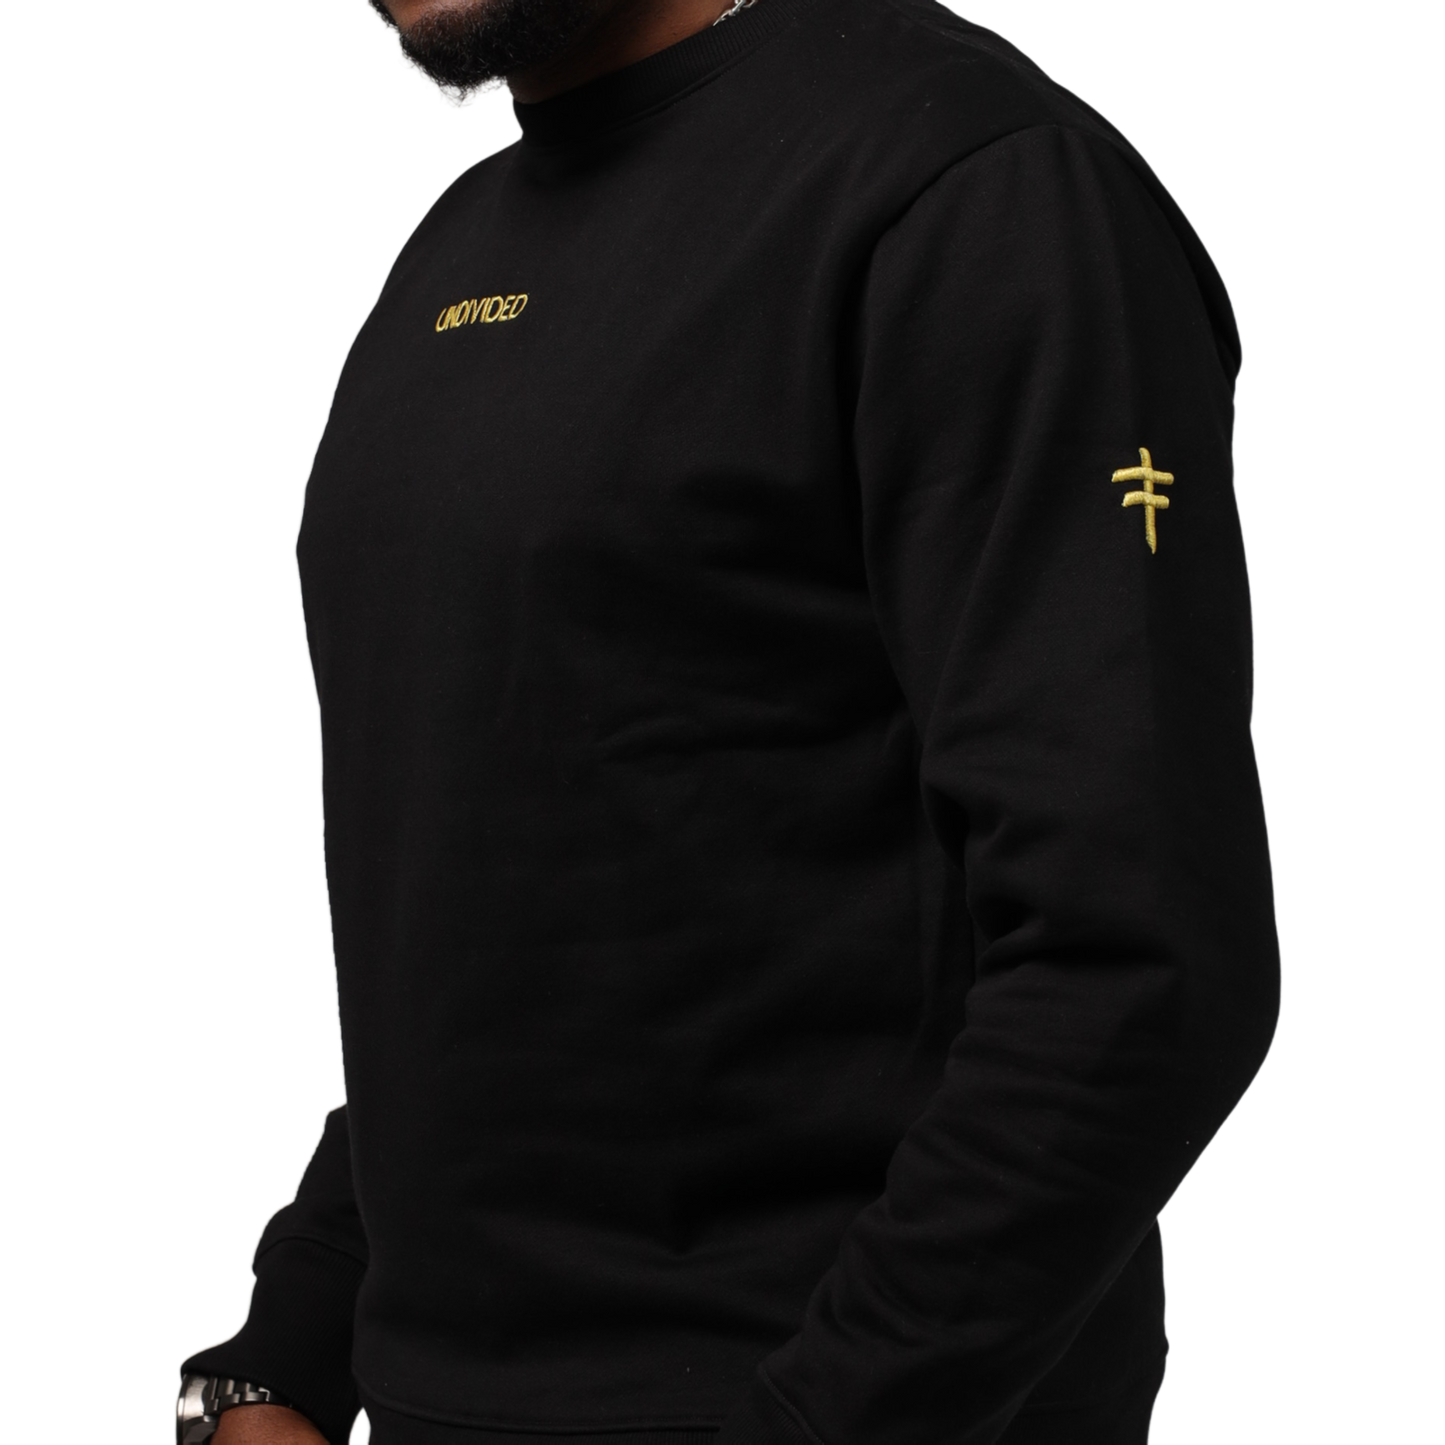 UNDIVIDED Black Sweat Top With Gold Embroidery